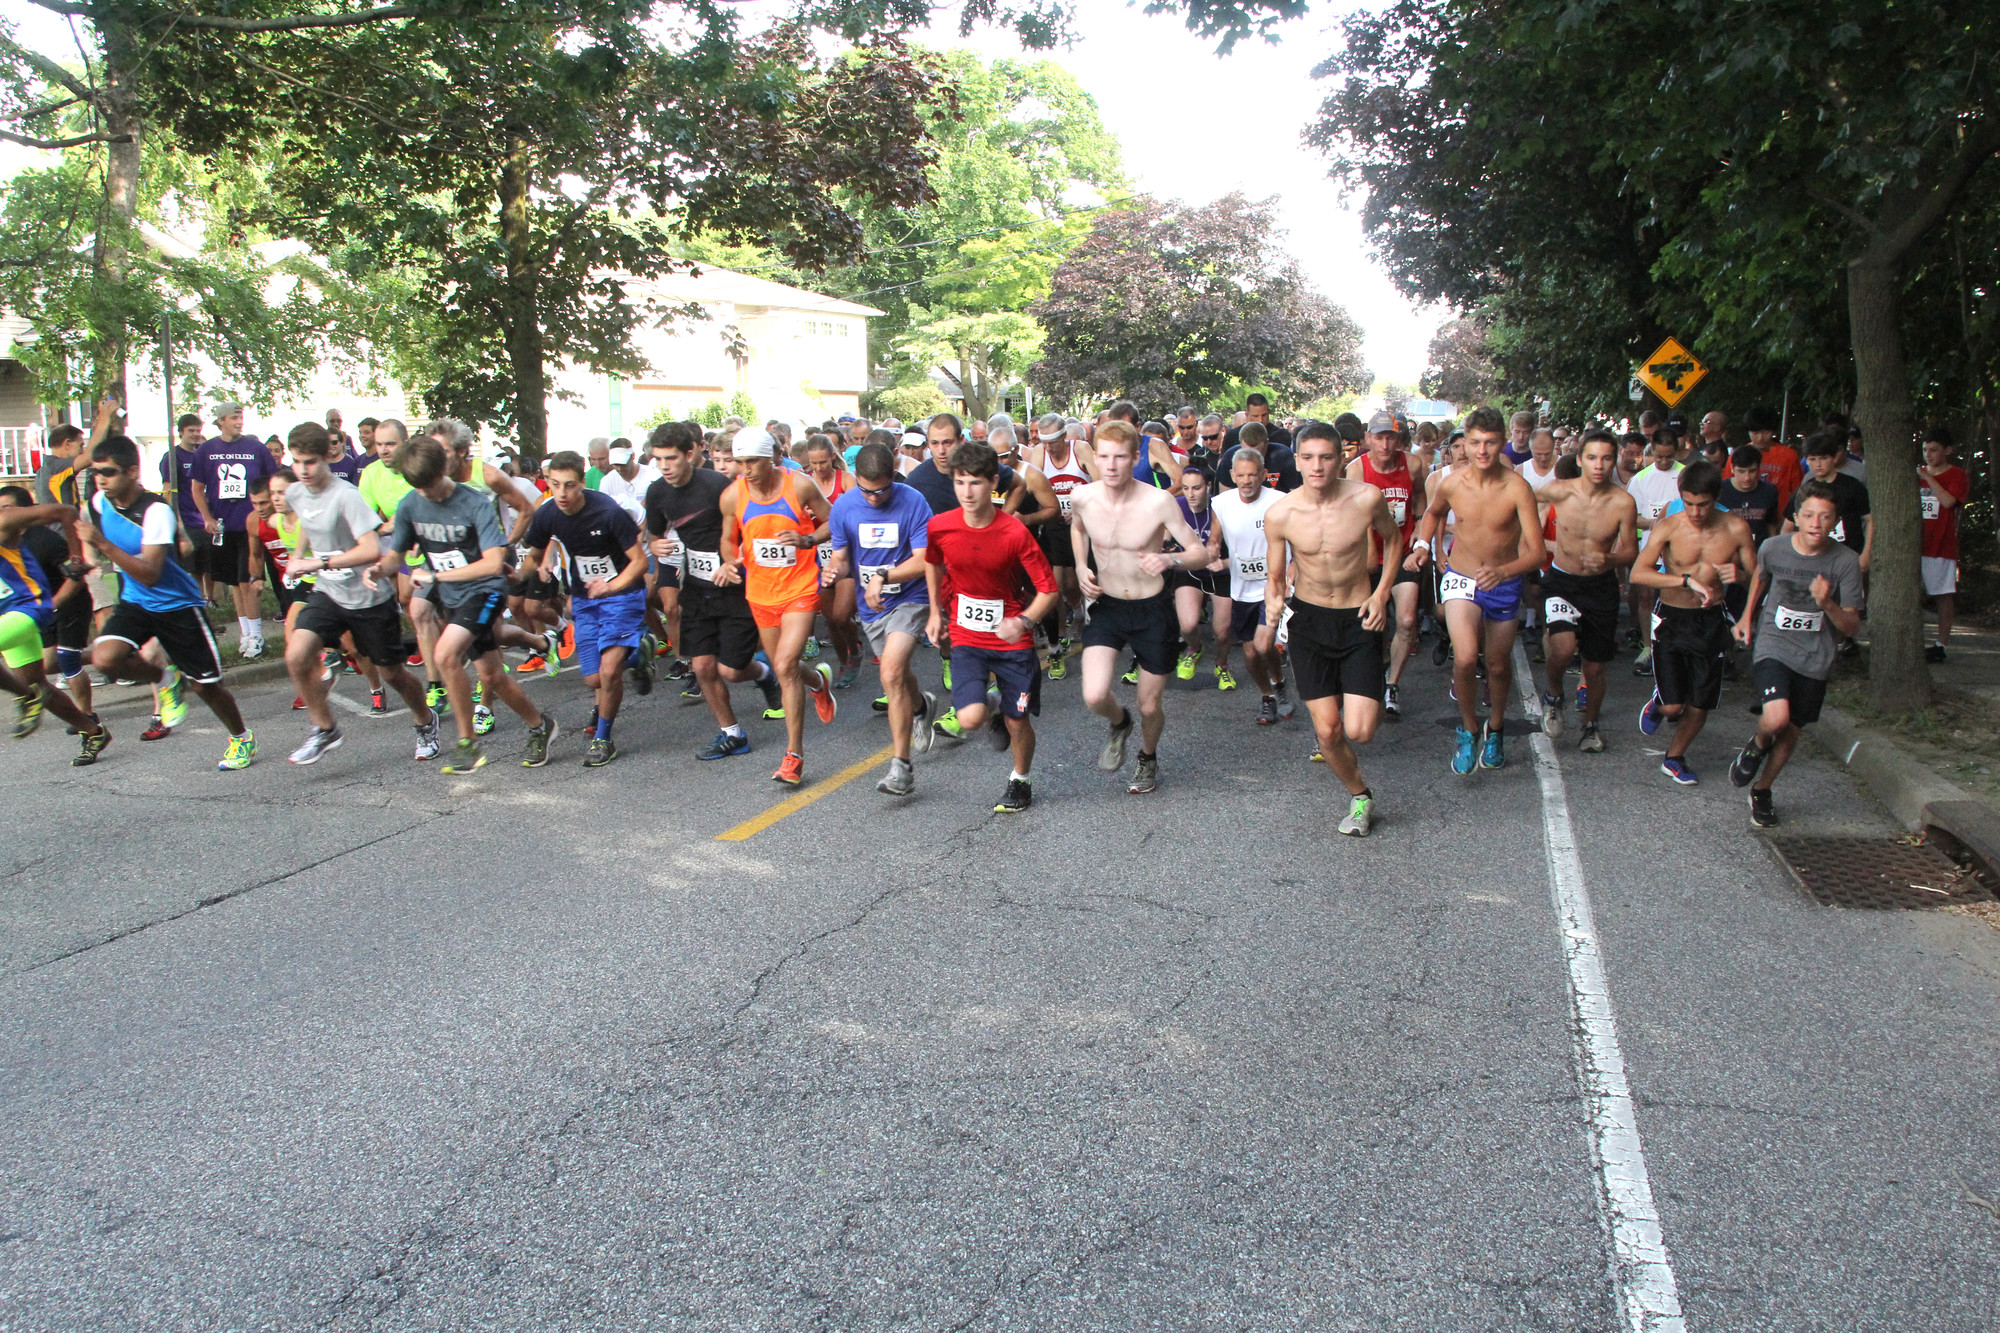 The second annual Purple Ribbon Run will be held on Saturday, July 25 in Wantagh.